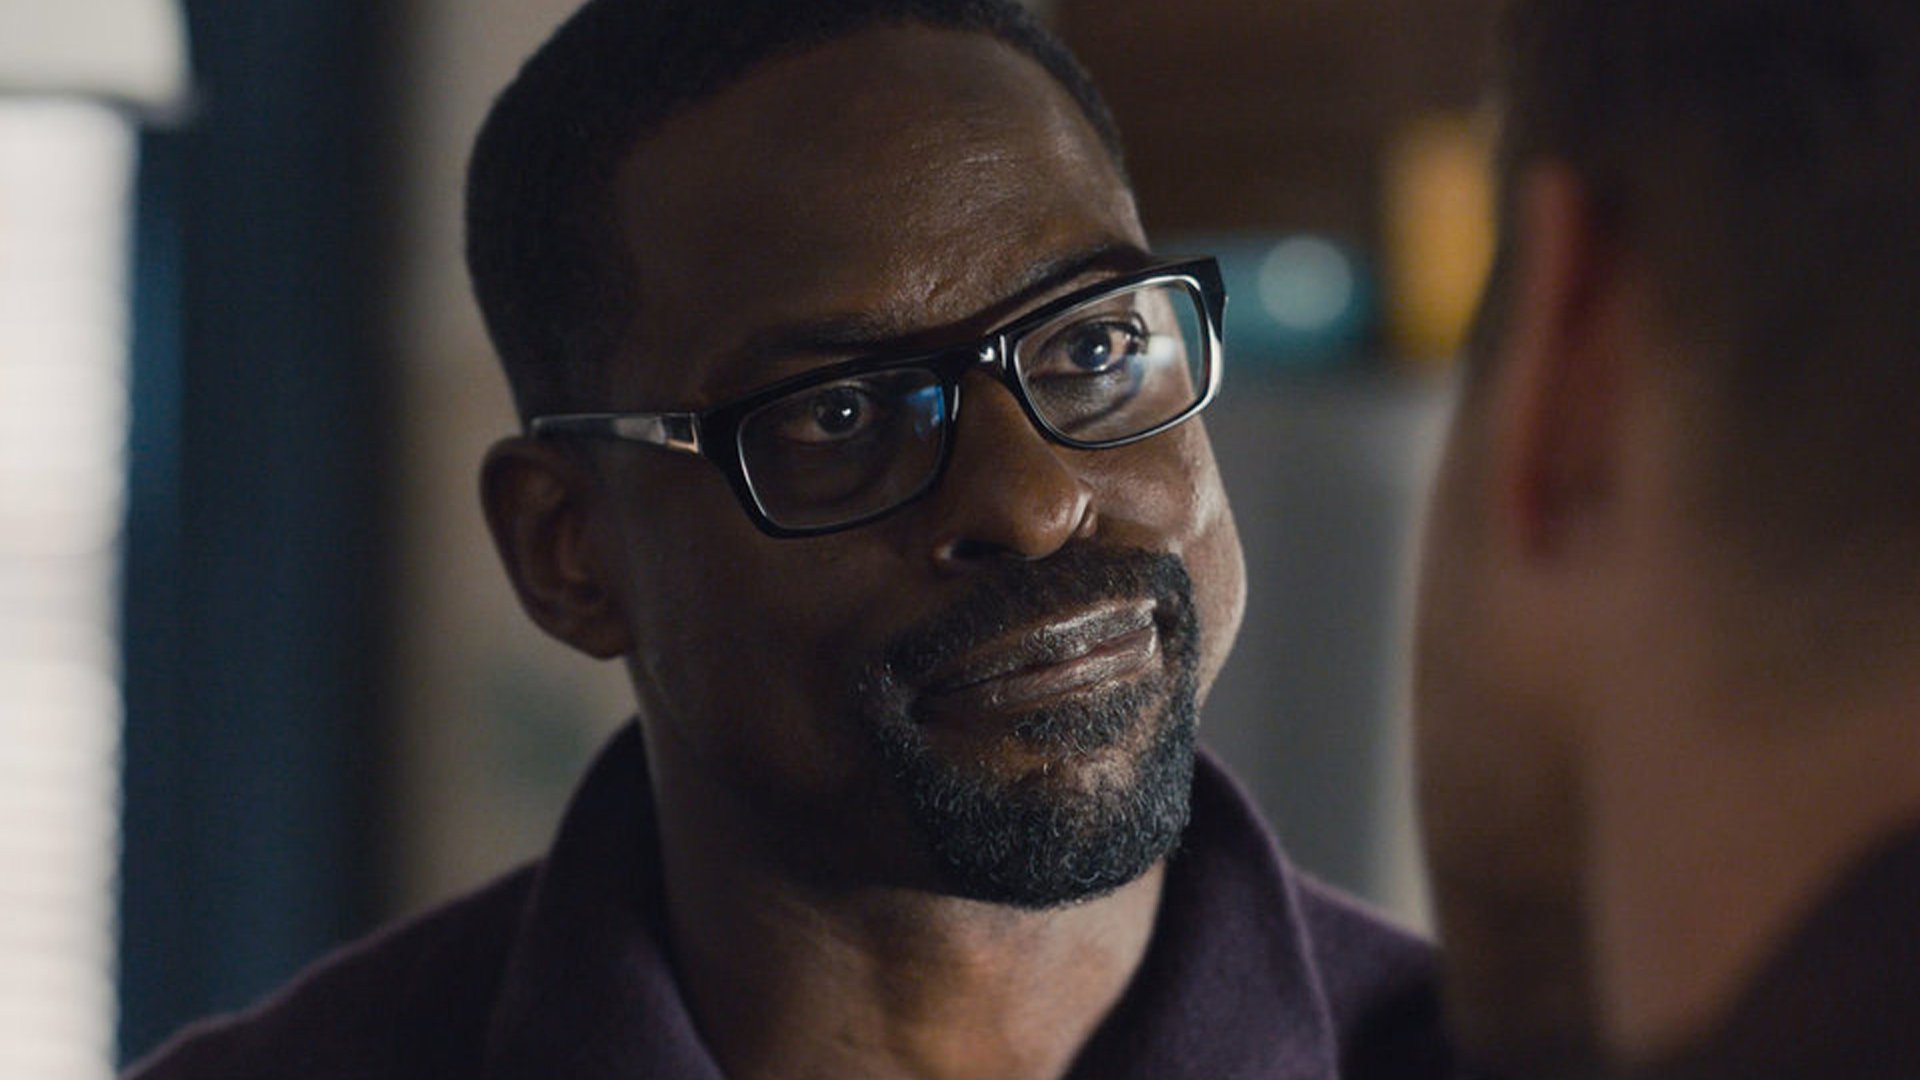 Sterling K. Brown as Randall Pearson talking to Justin Hartley as Kevin Pearson in ‘This Is Us’ Season 5 Episode 13